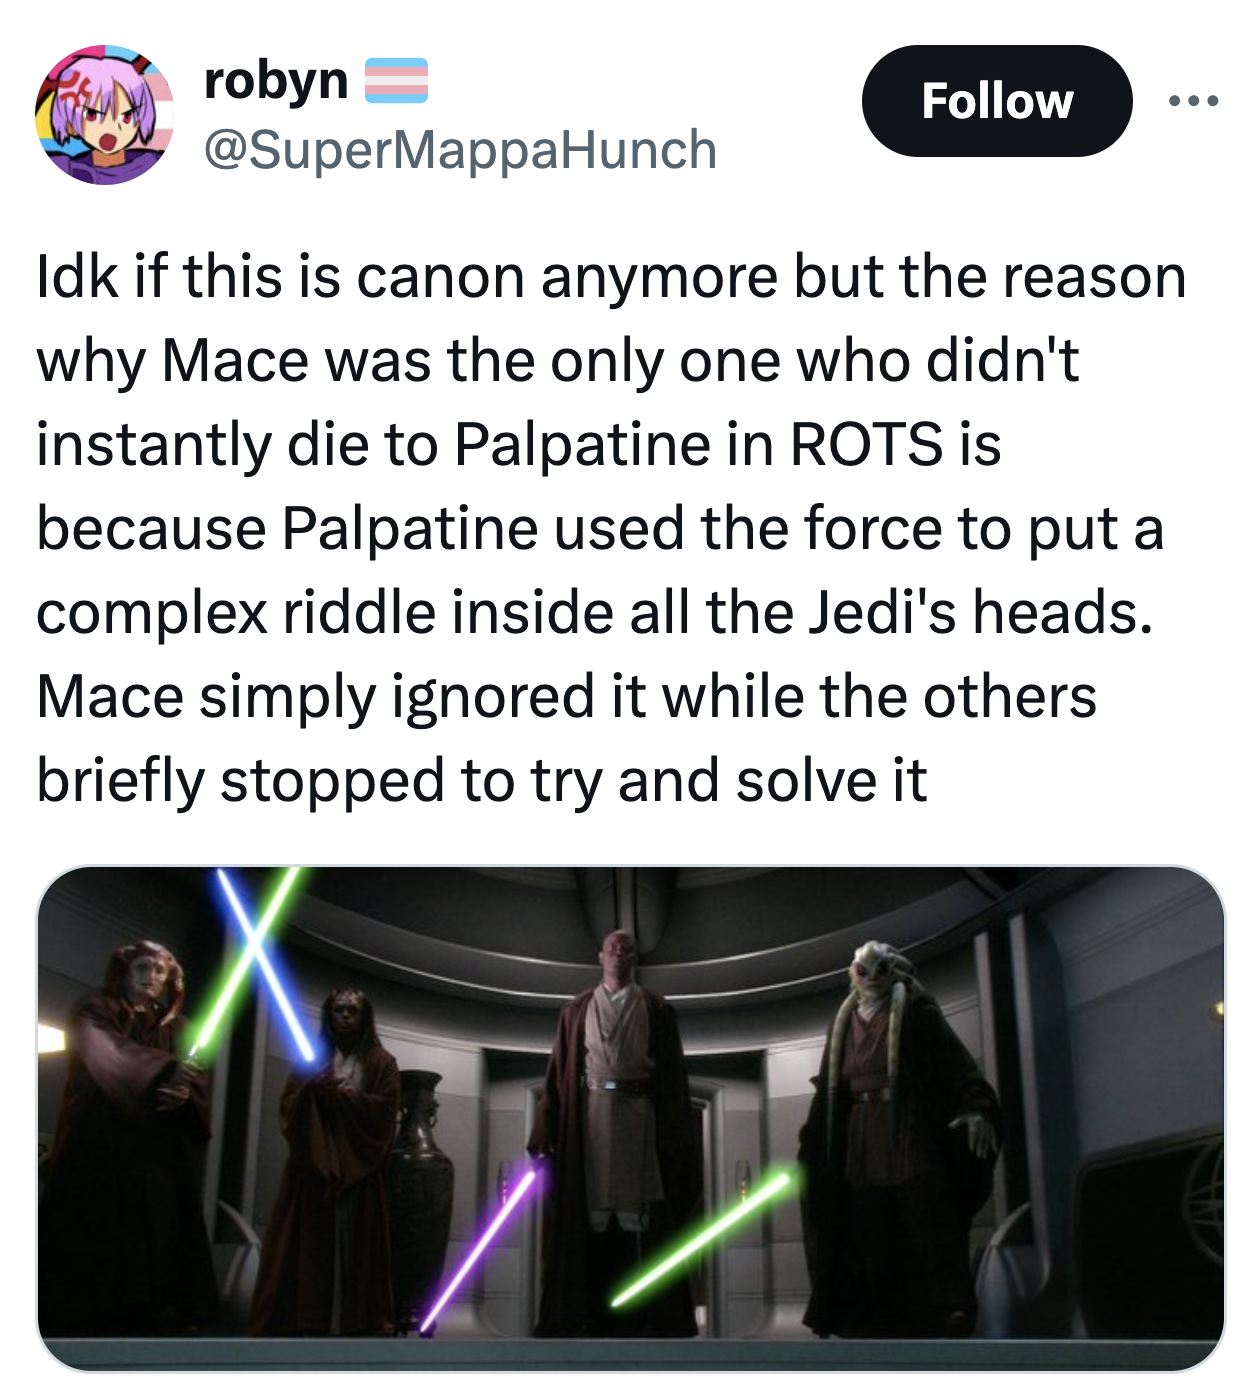 work conflict meme - robyn Idk if this is canon anymore but the reason why Mace was the only one who didn't instantly die to Palpatine in Rots is because Palpatine used the force to put a complex riddle inside all the Jedi's heads. Mace simply ignored it 